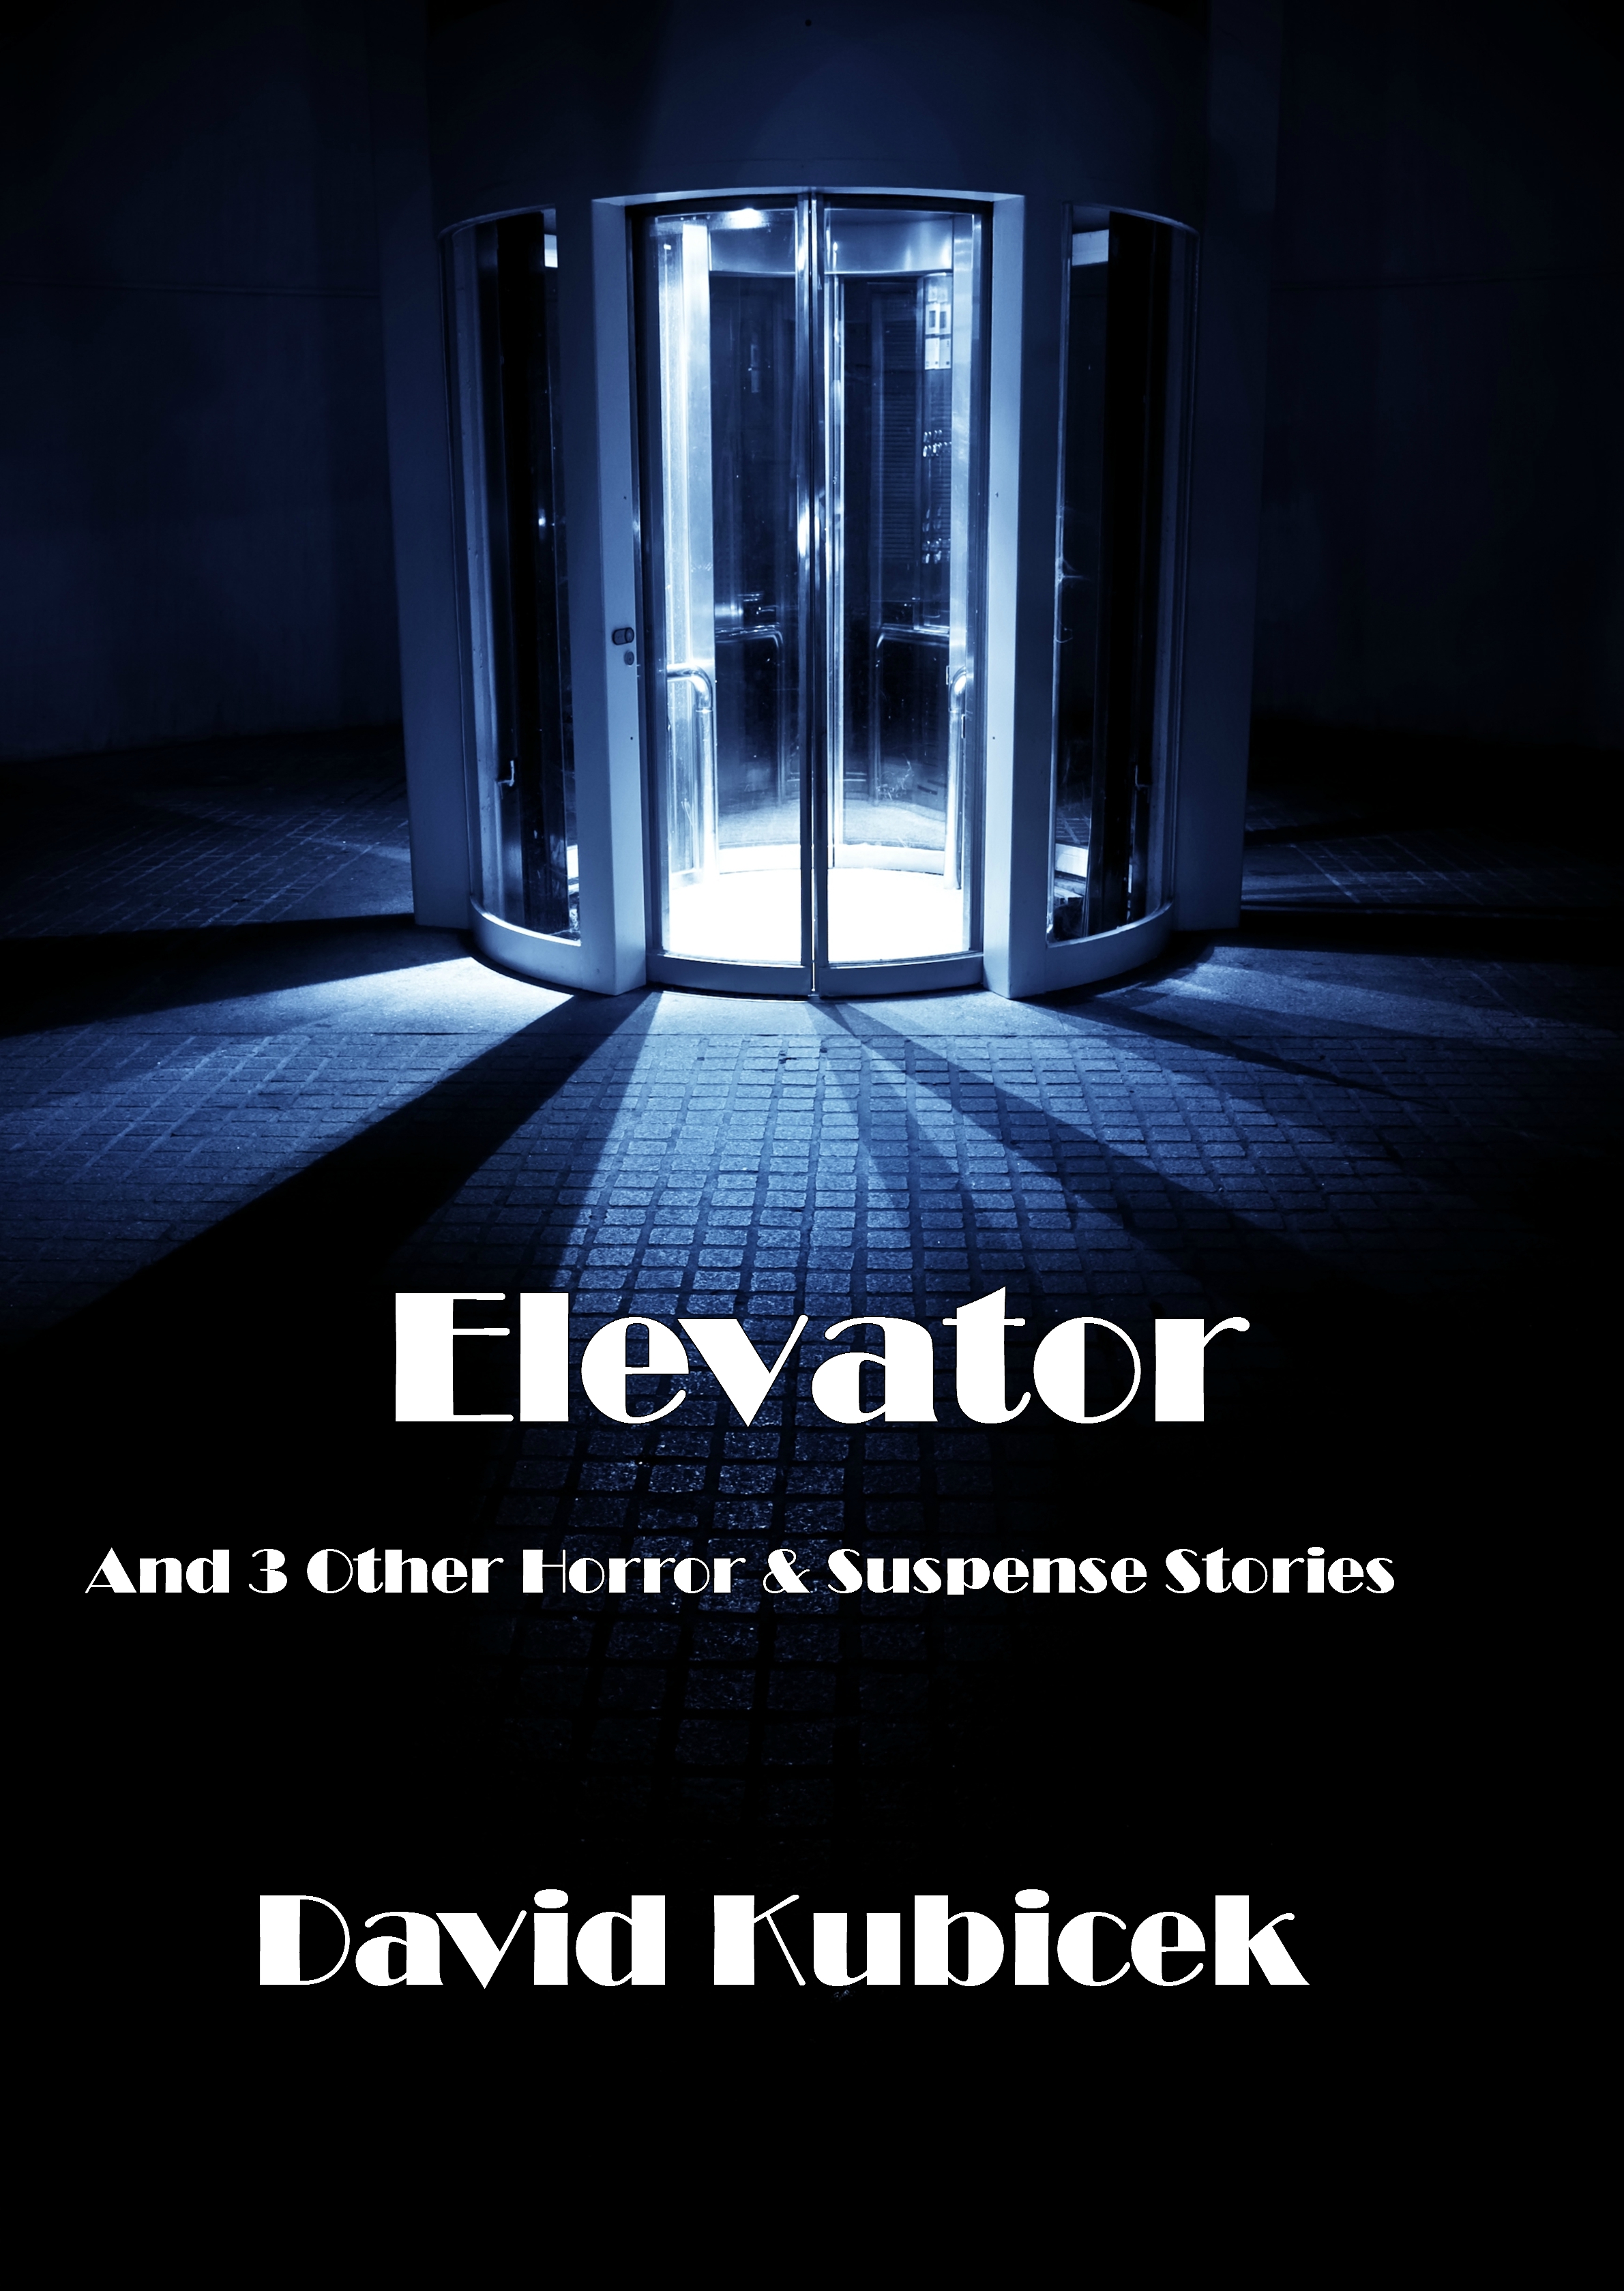 Smashwords Elevator And 3 Other Stories Of Suspense And Horror